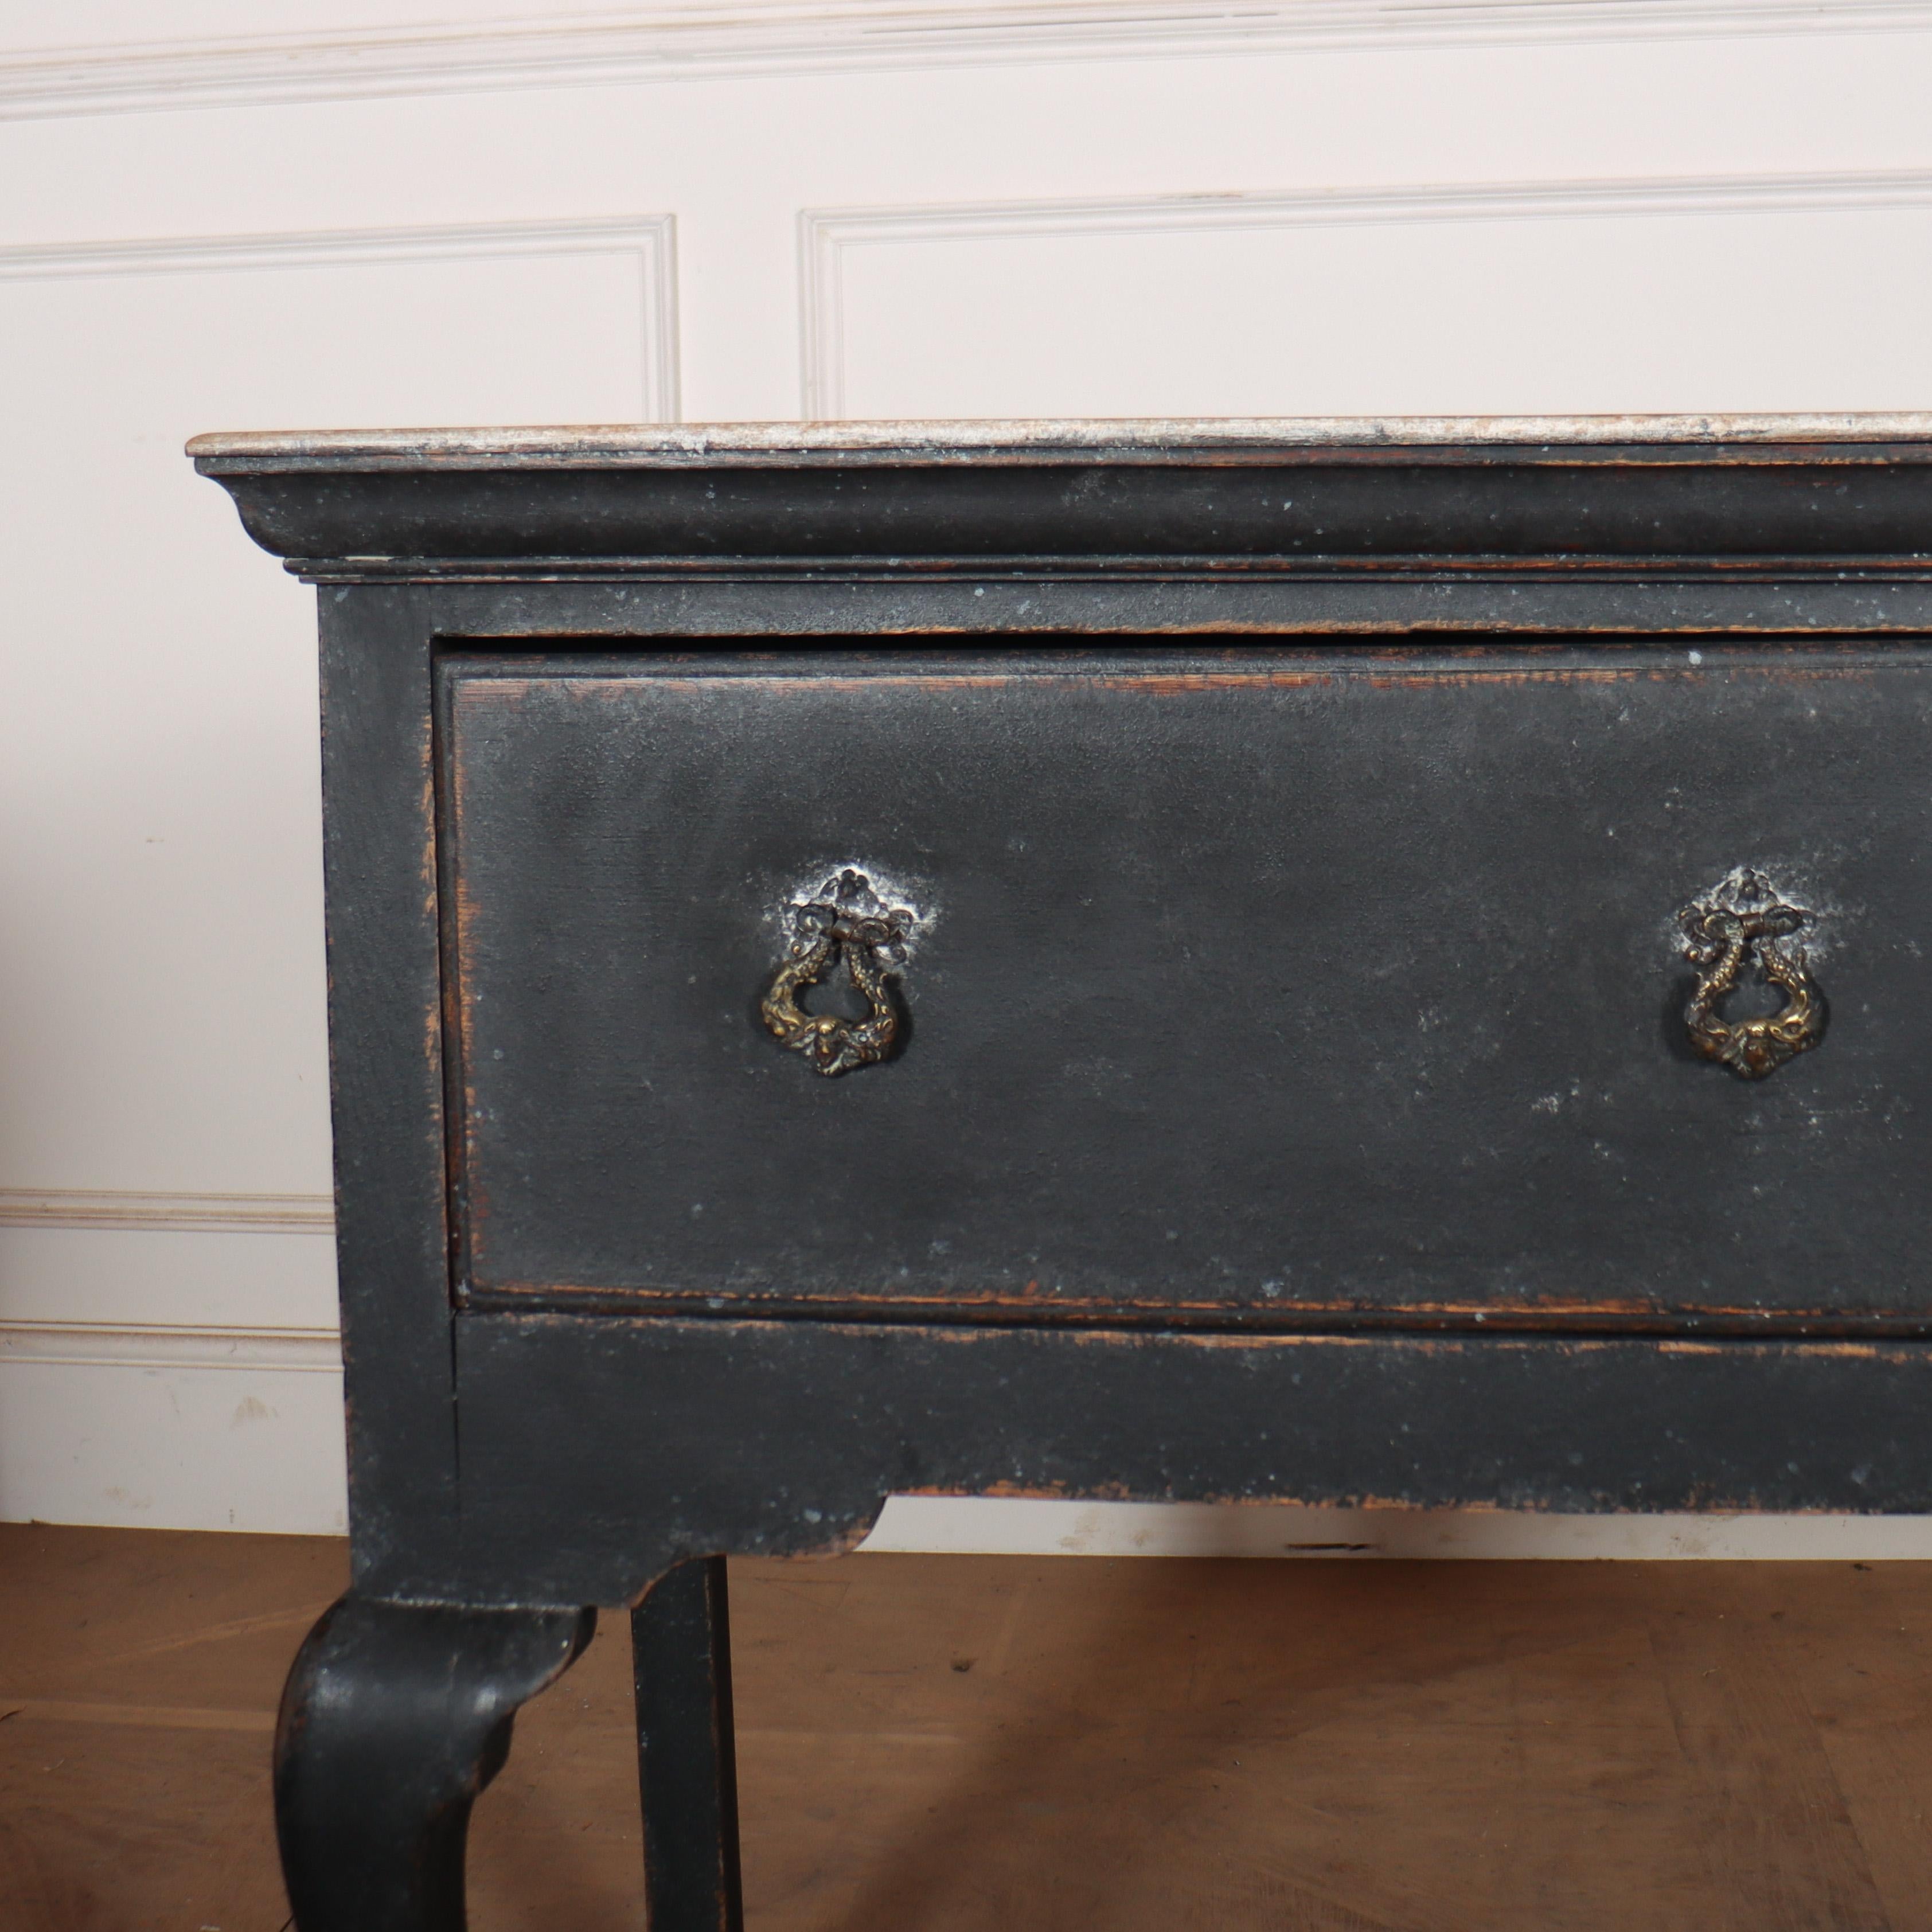 19th C English painted cabriole leg dresser base with a faux marble top. 1860.

Reference: 8285

Dimensions
69.5 inches (177 cms) Wide
19 inches (48 cms) Deep
33 inches (84 cms) High